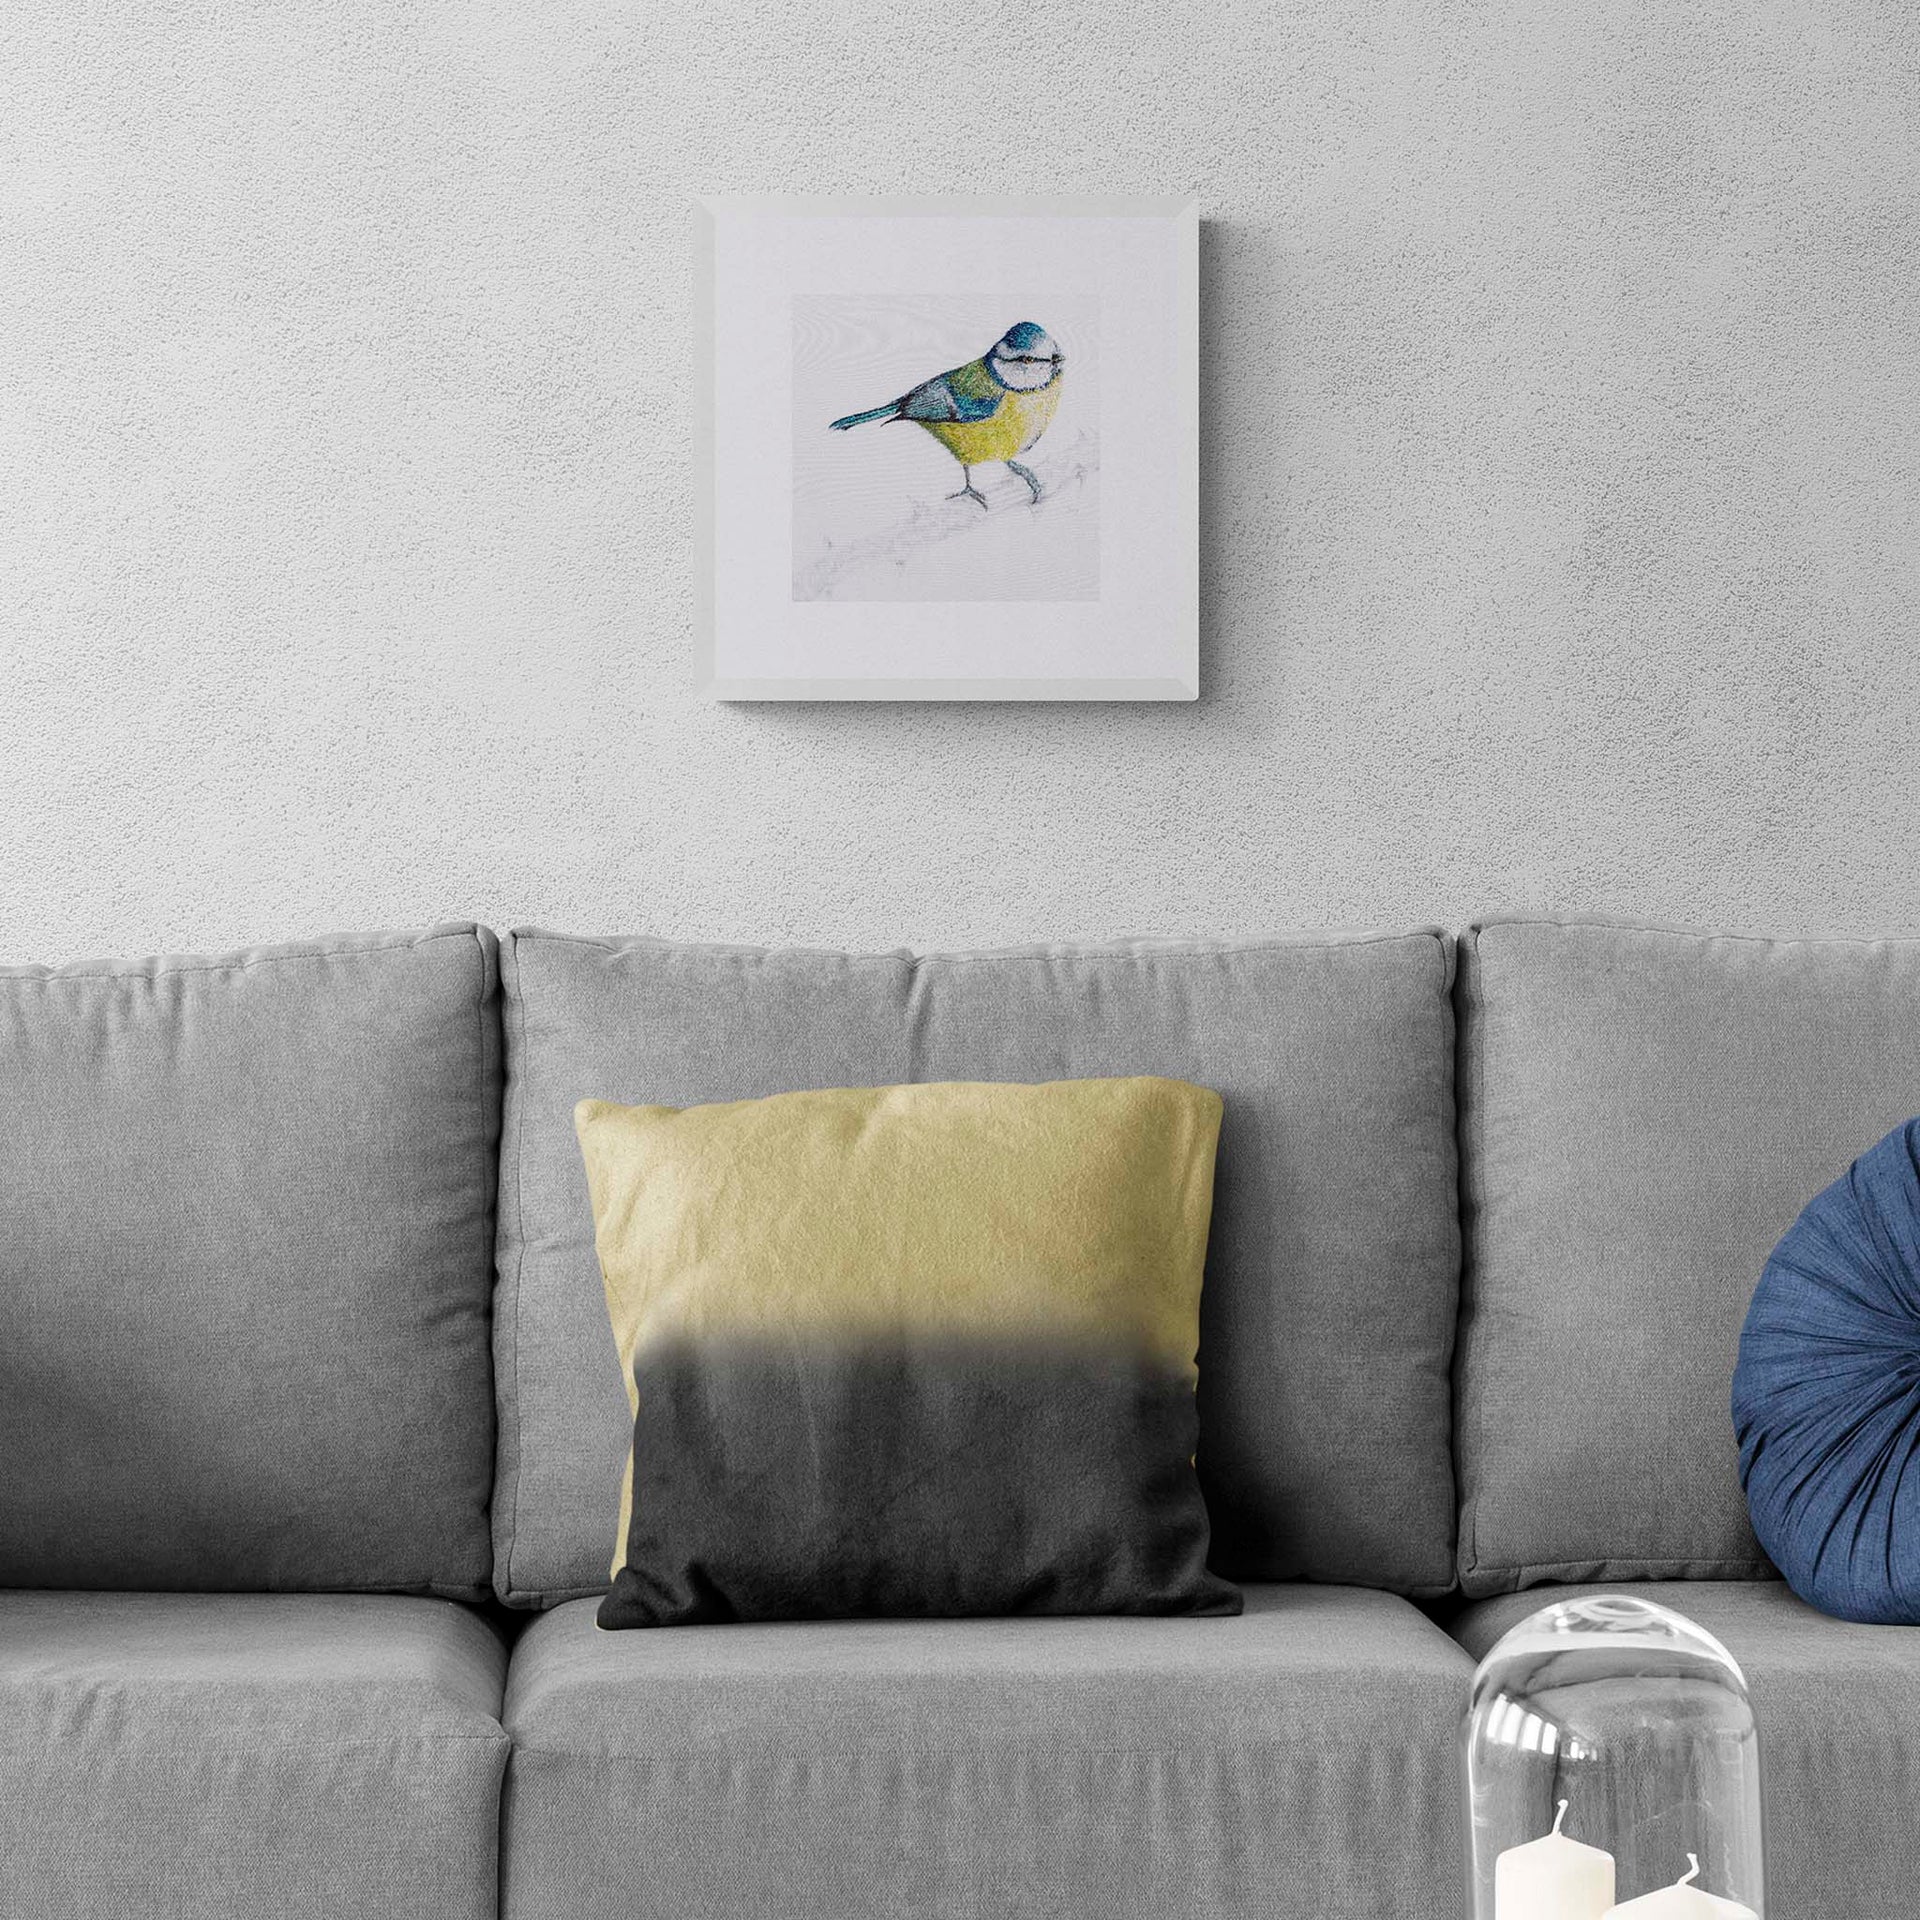 Blue tit hand embroidery limited edition print in white frame on the wall